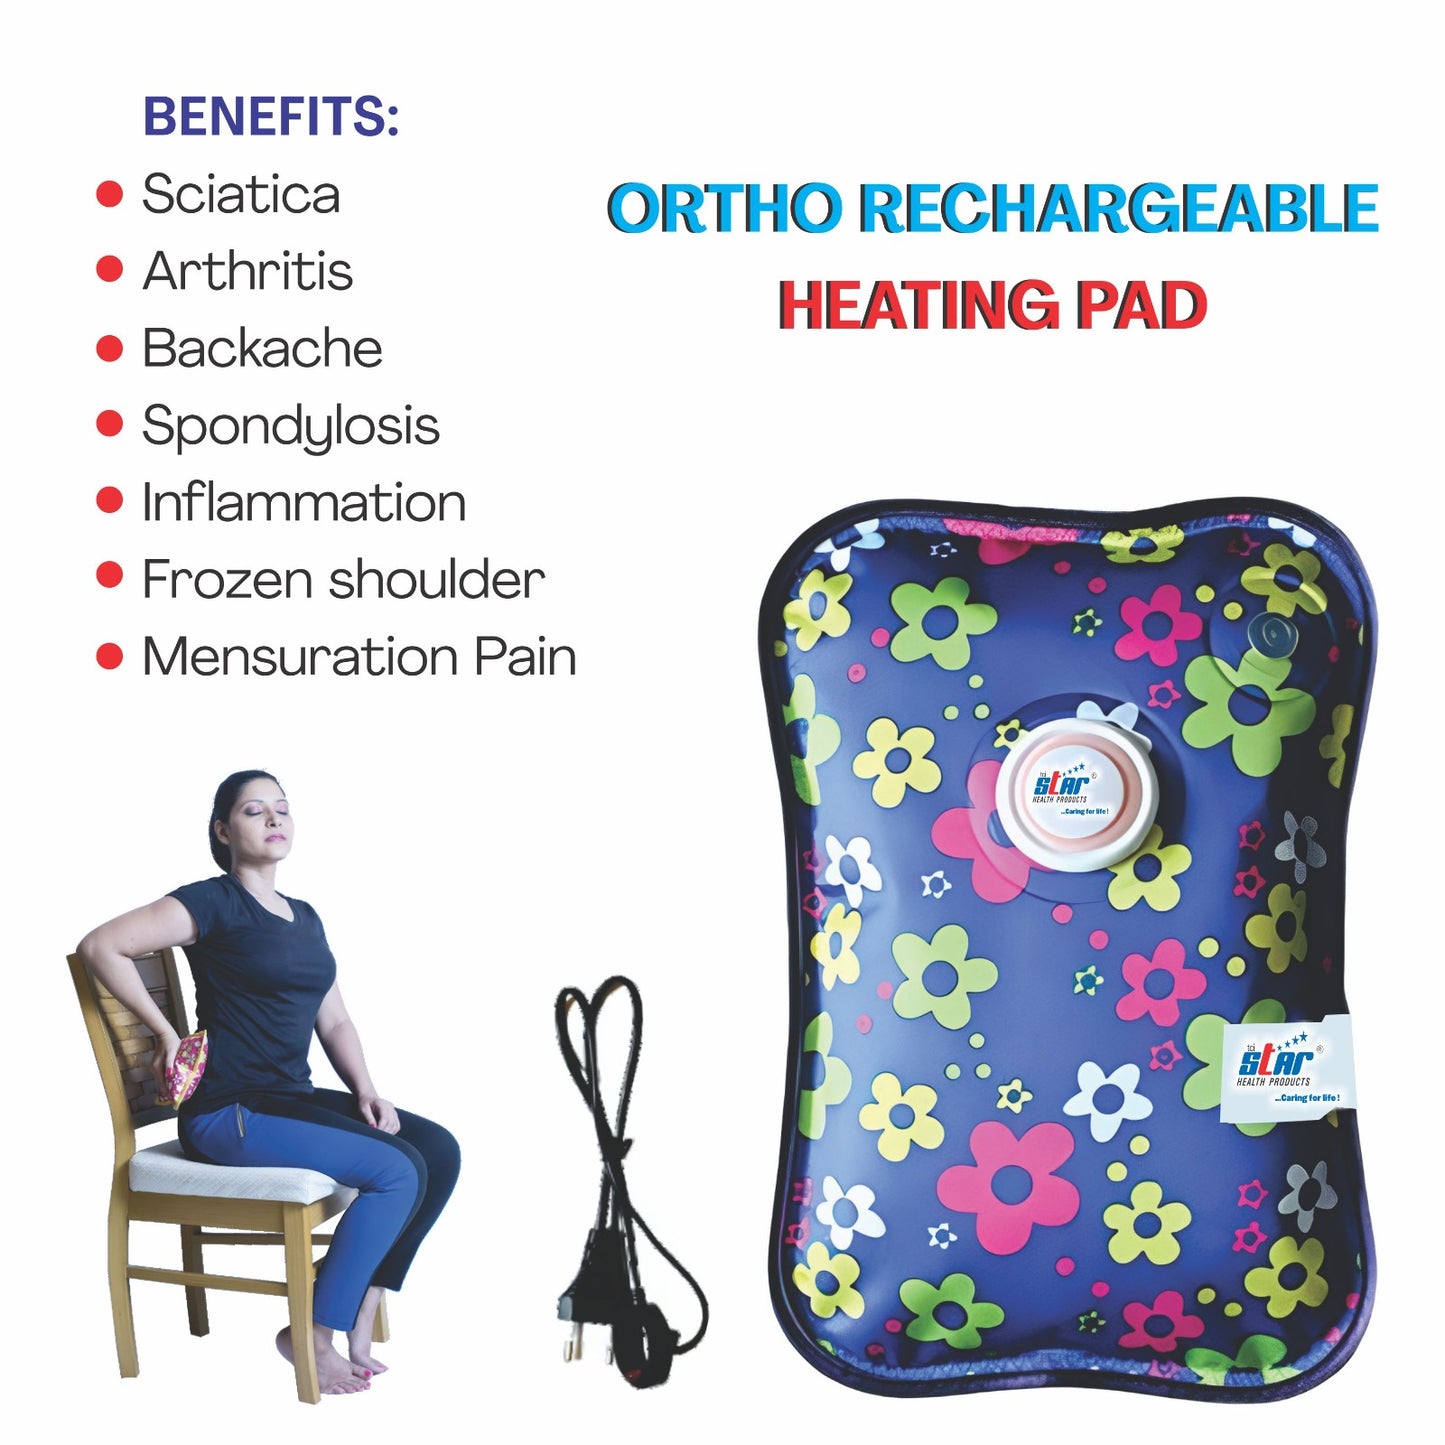 Ortho Rechargeable Heating Pad